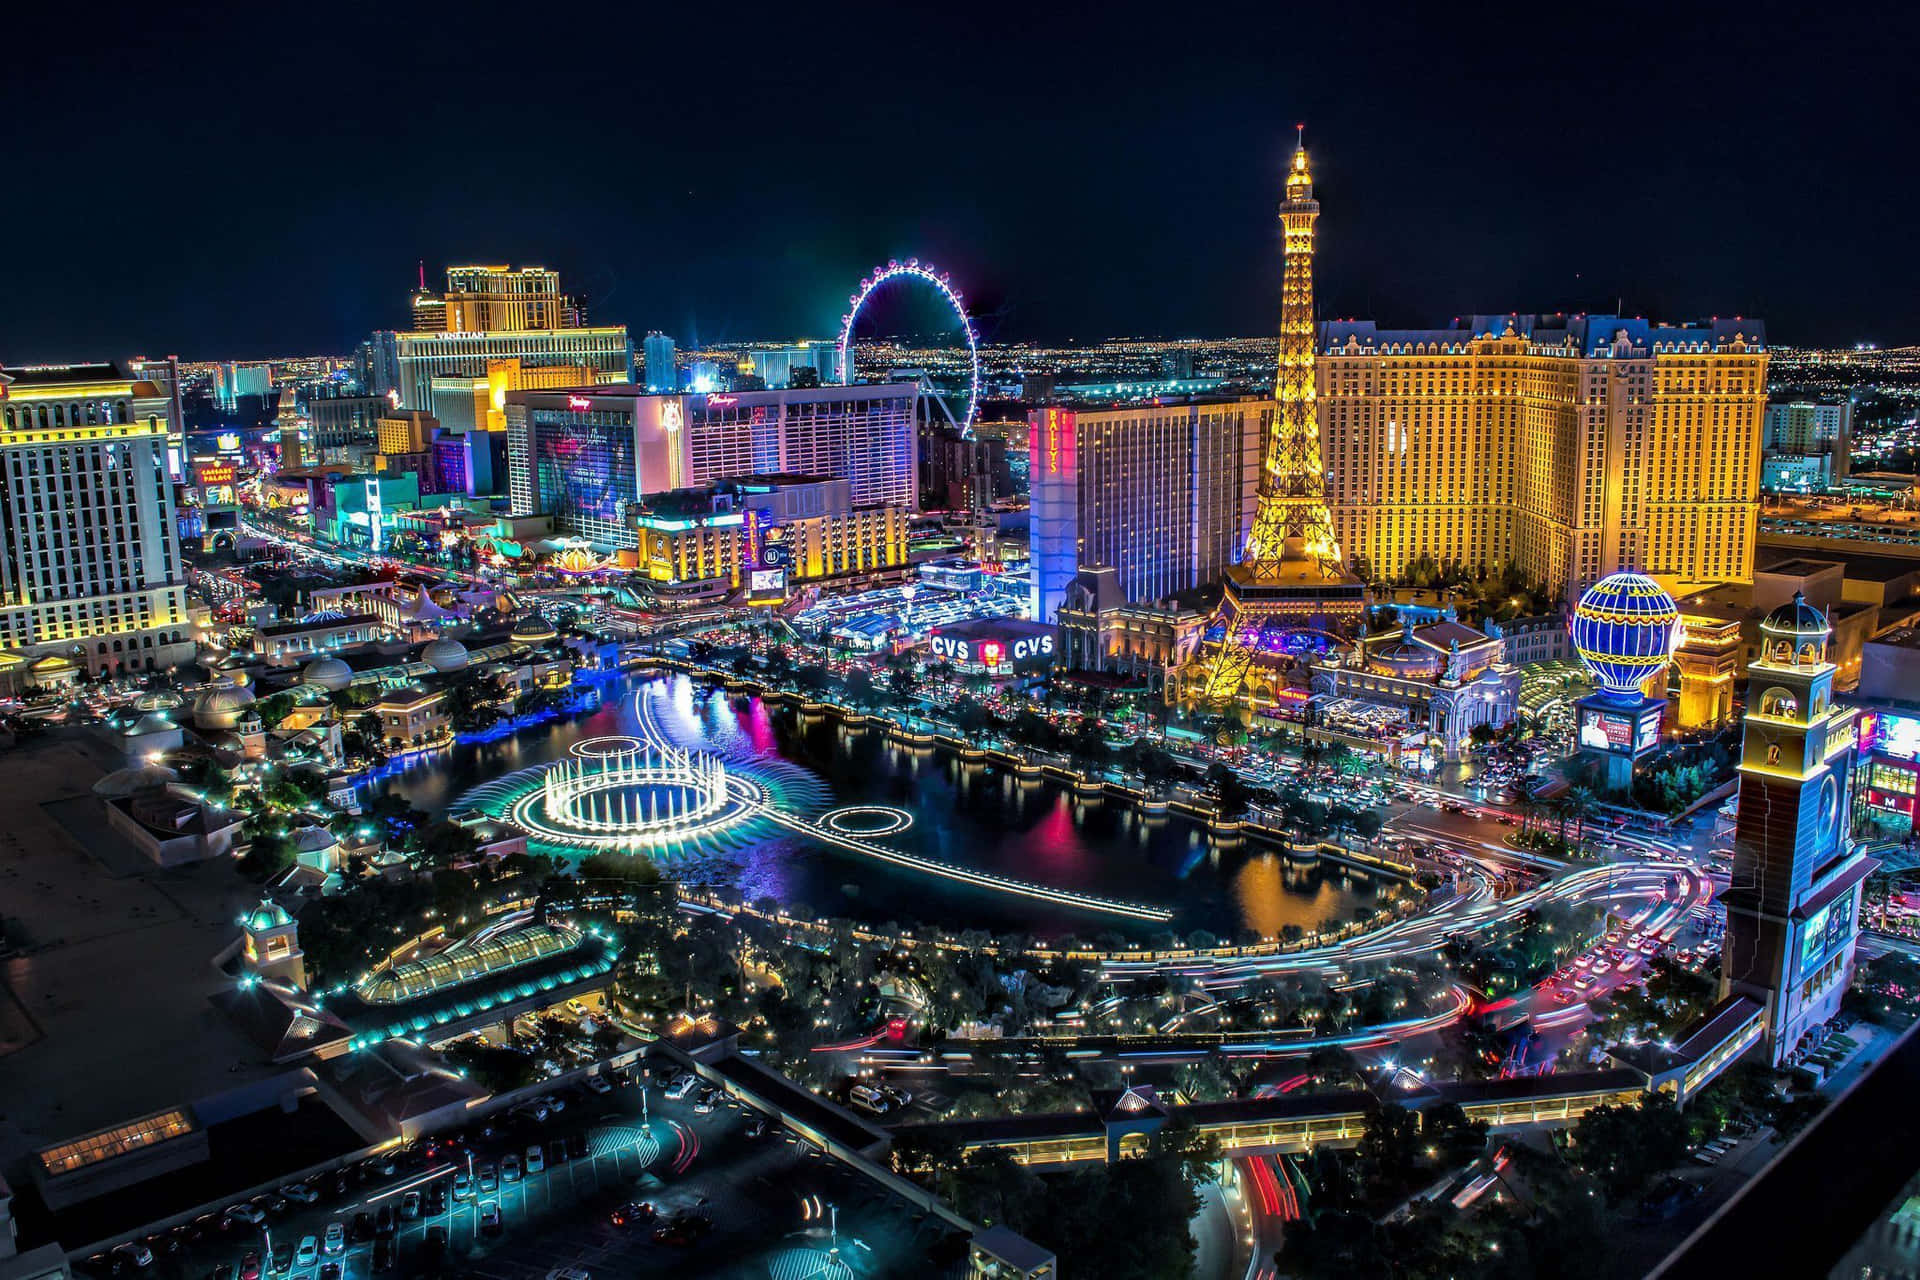 "The lights of Las Vegas sparkle against the backdrop of the skyline." Wallpaper